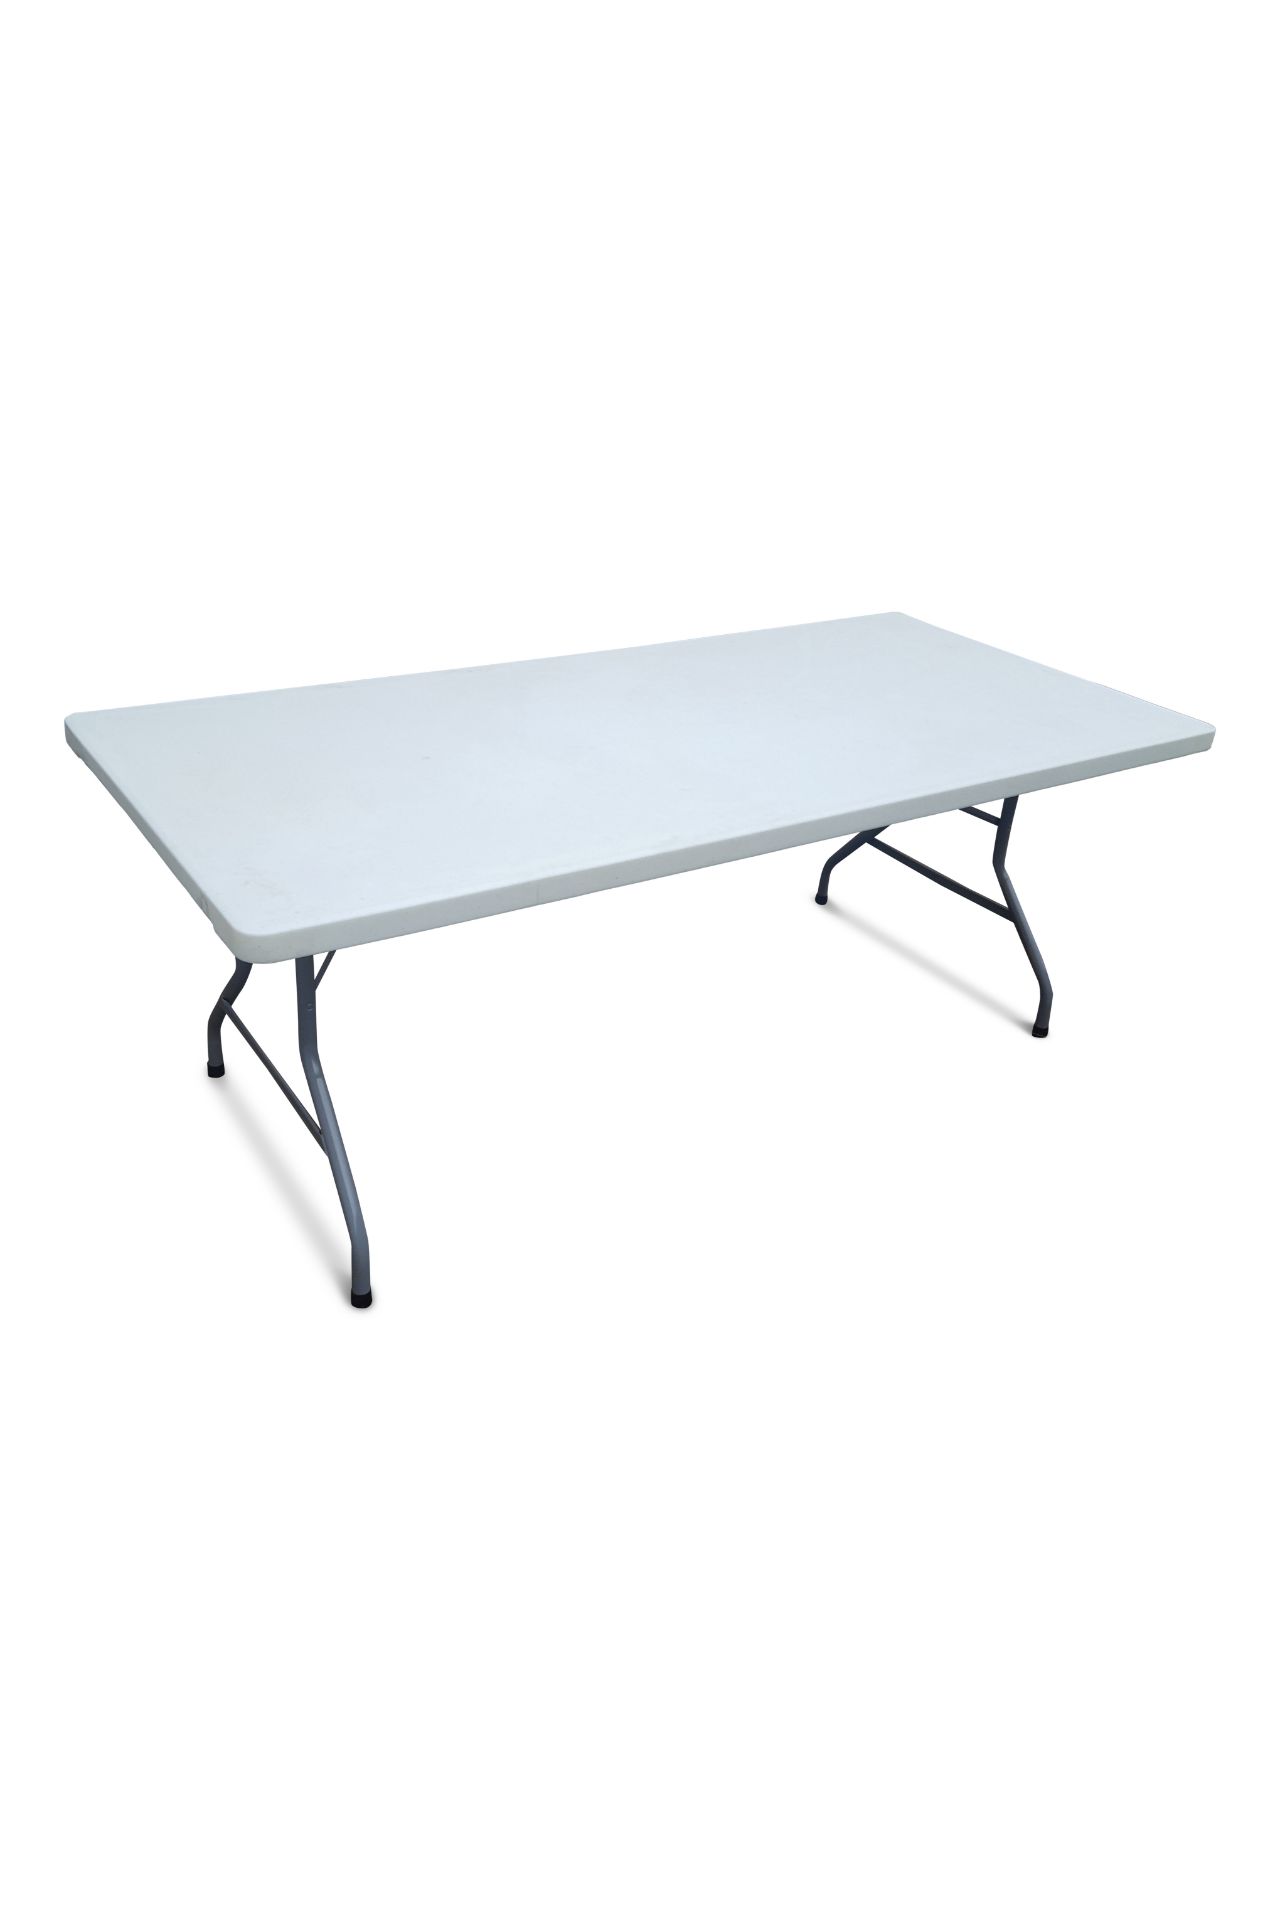 V *TRADE QTY* Grade A 6ft 6" Plastic Trestle Table X150 YOUR BID PRICE TO BE MULTIPLIED BY ONE